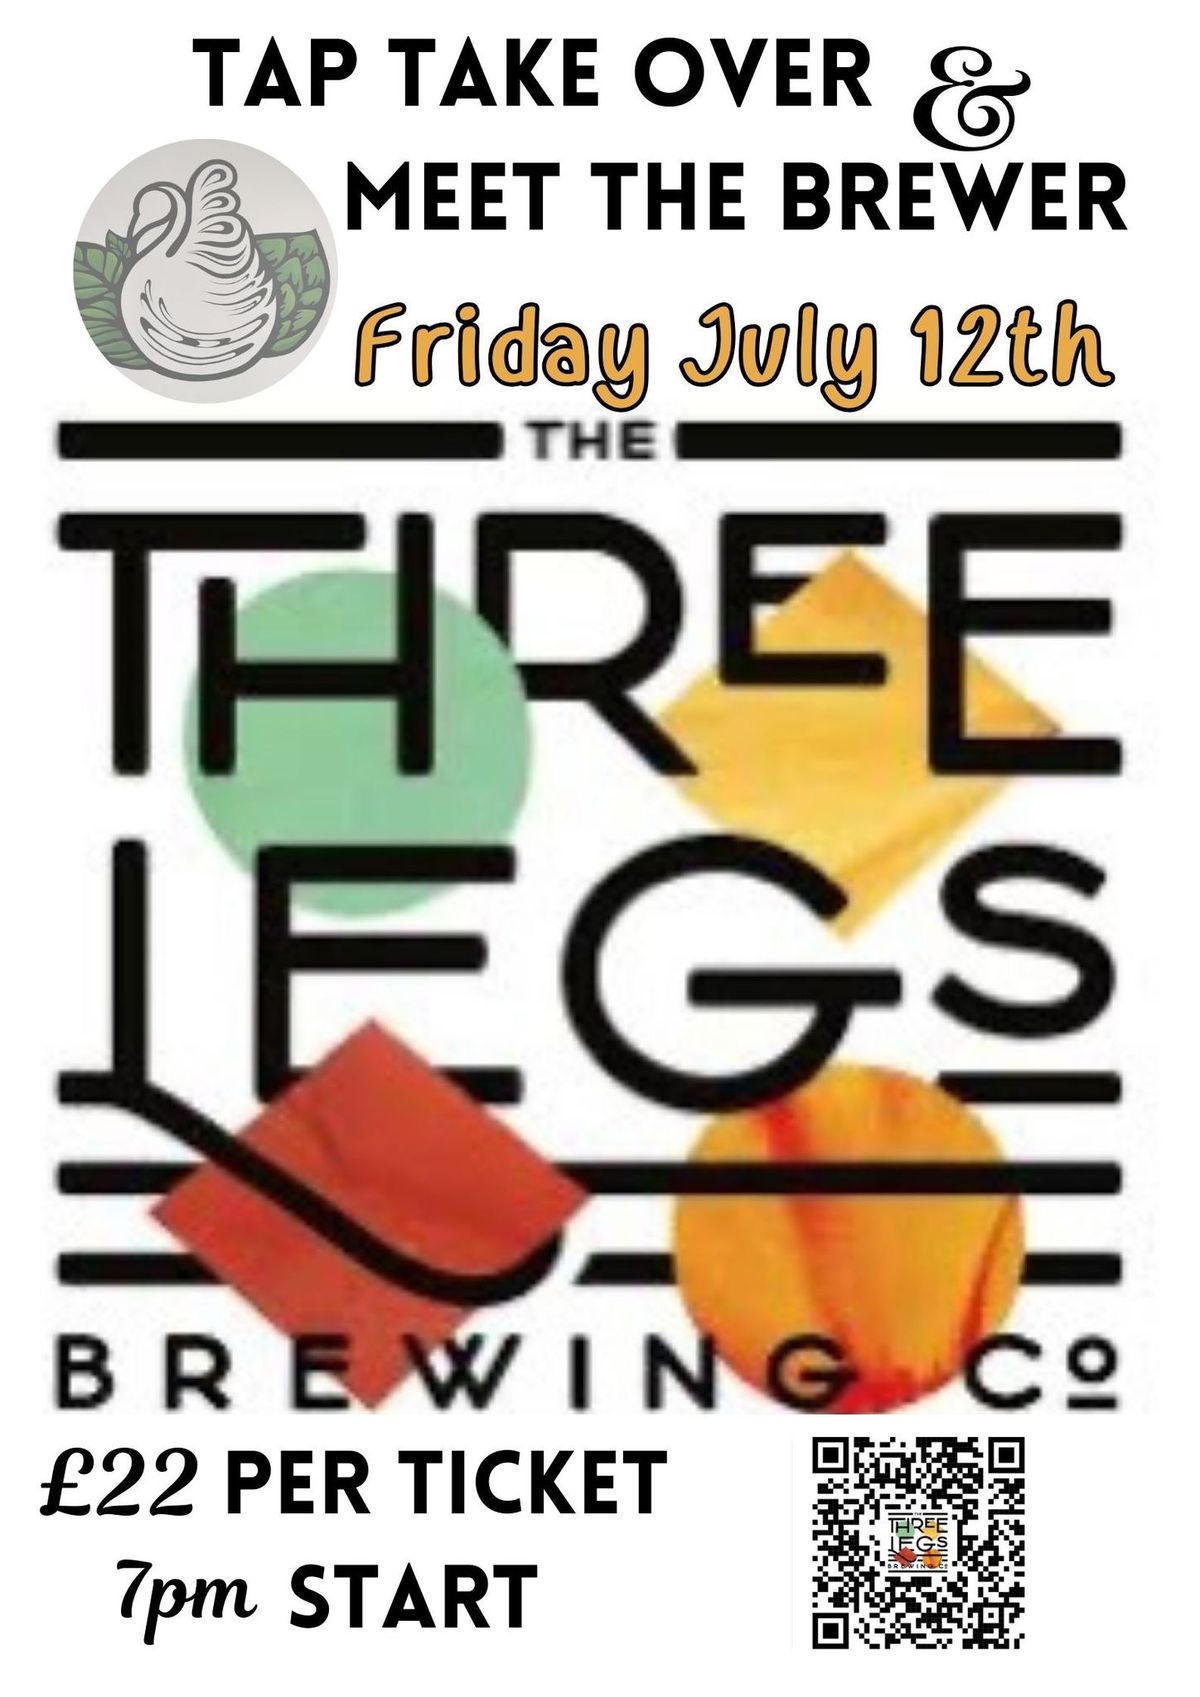 Meet the Brewer - The Three Legs Brewing Co 